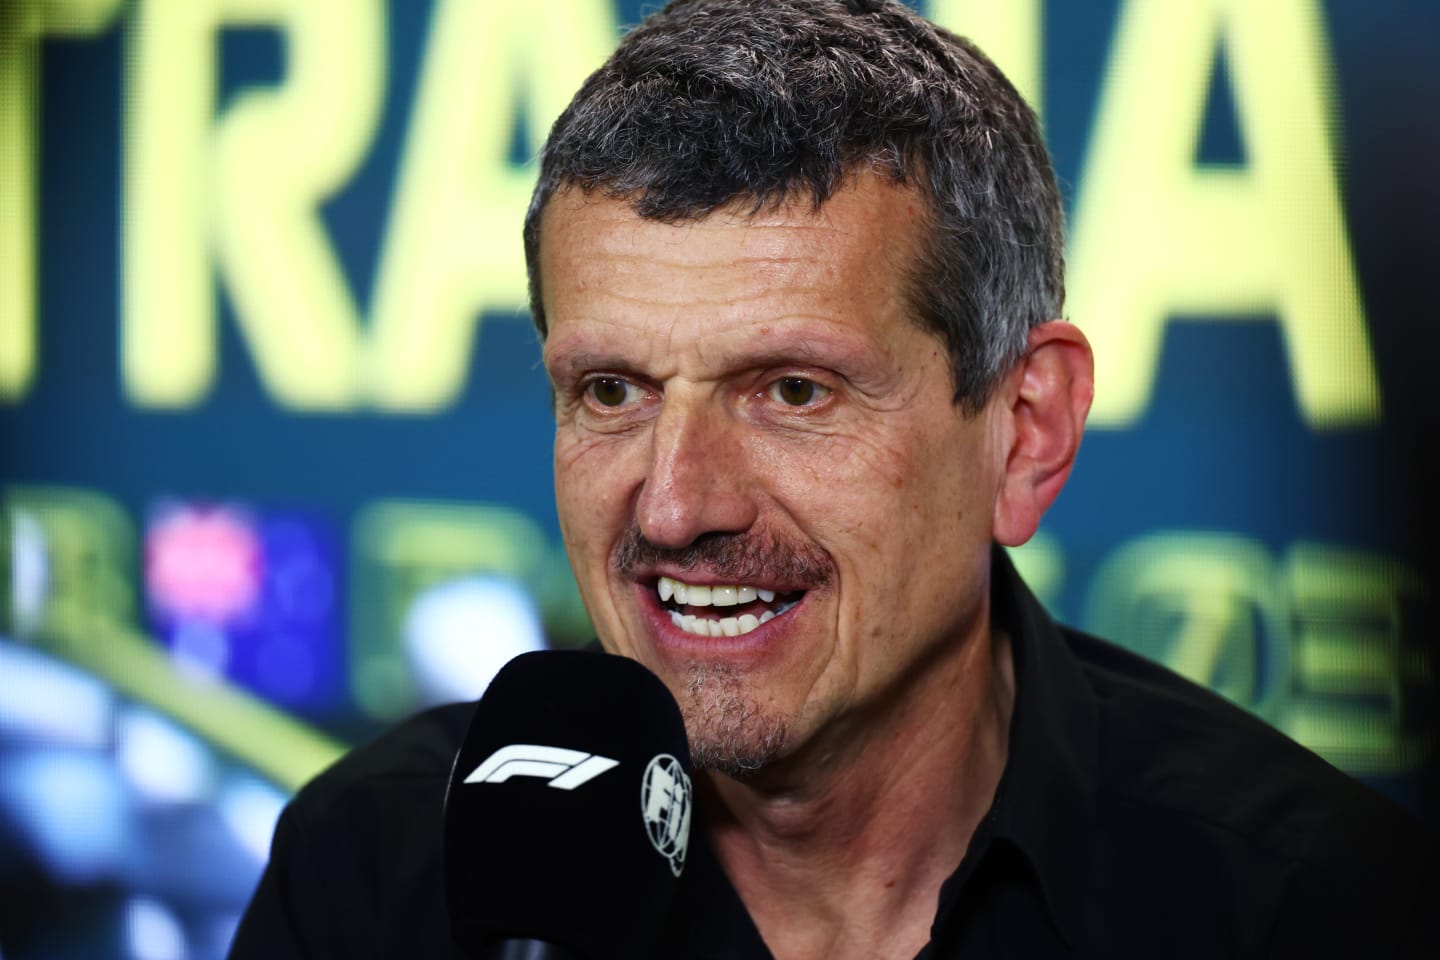 MELBOURNE, AUSTRALIA - MARCH 31: Haas F1 Team Principal Guenther Steiner talks in the Team Principals Press Conference during practice ahead of the F1 Grand Prix of Australia at Albert Park Grand Prix Circuit on March 31, 2023 in Melbourne, Australia. (Photo by Dan Istitene/Getty Images)